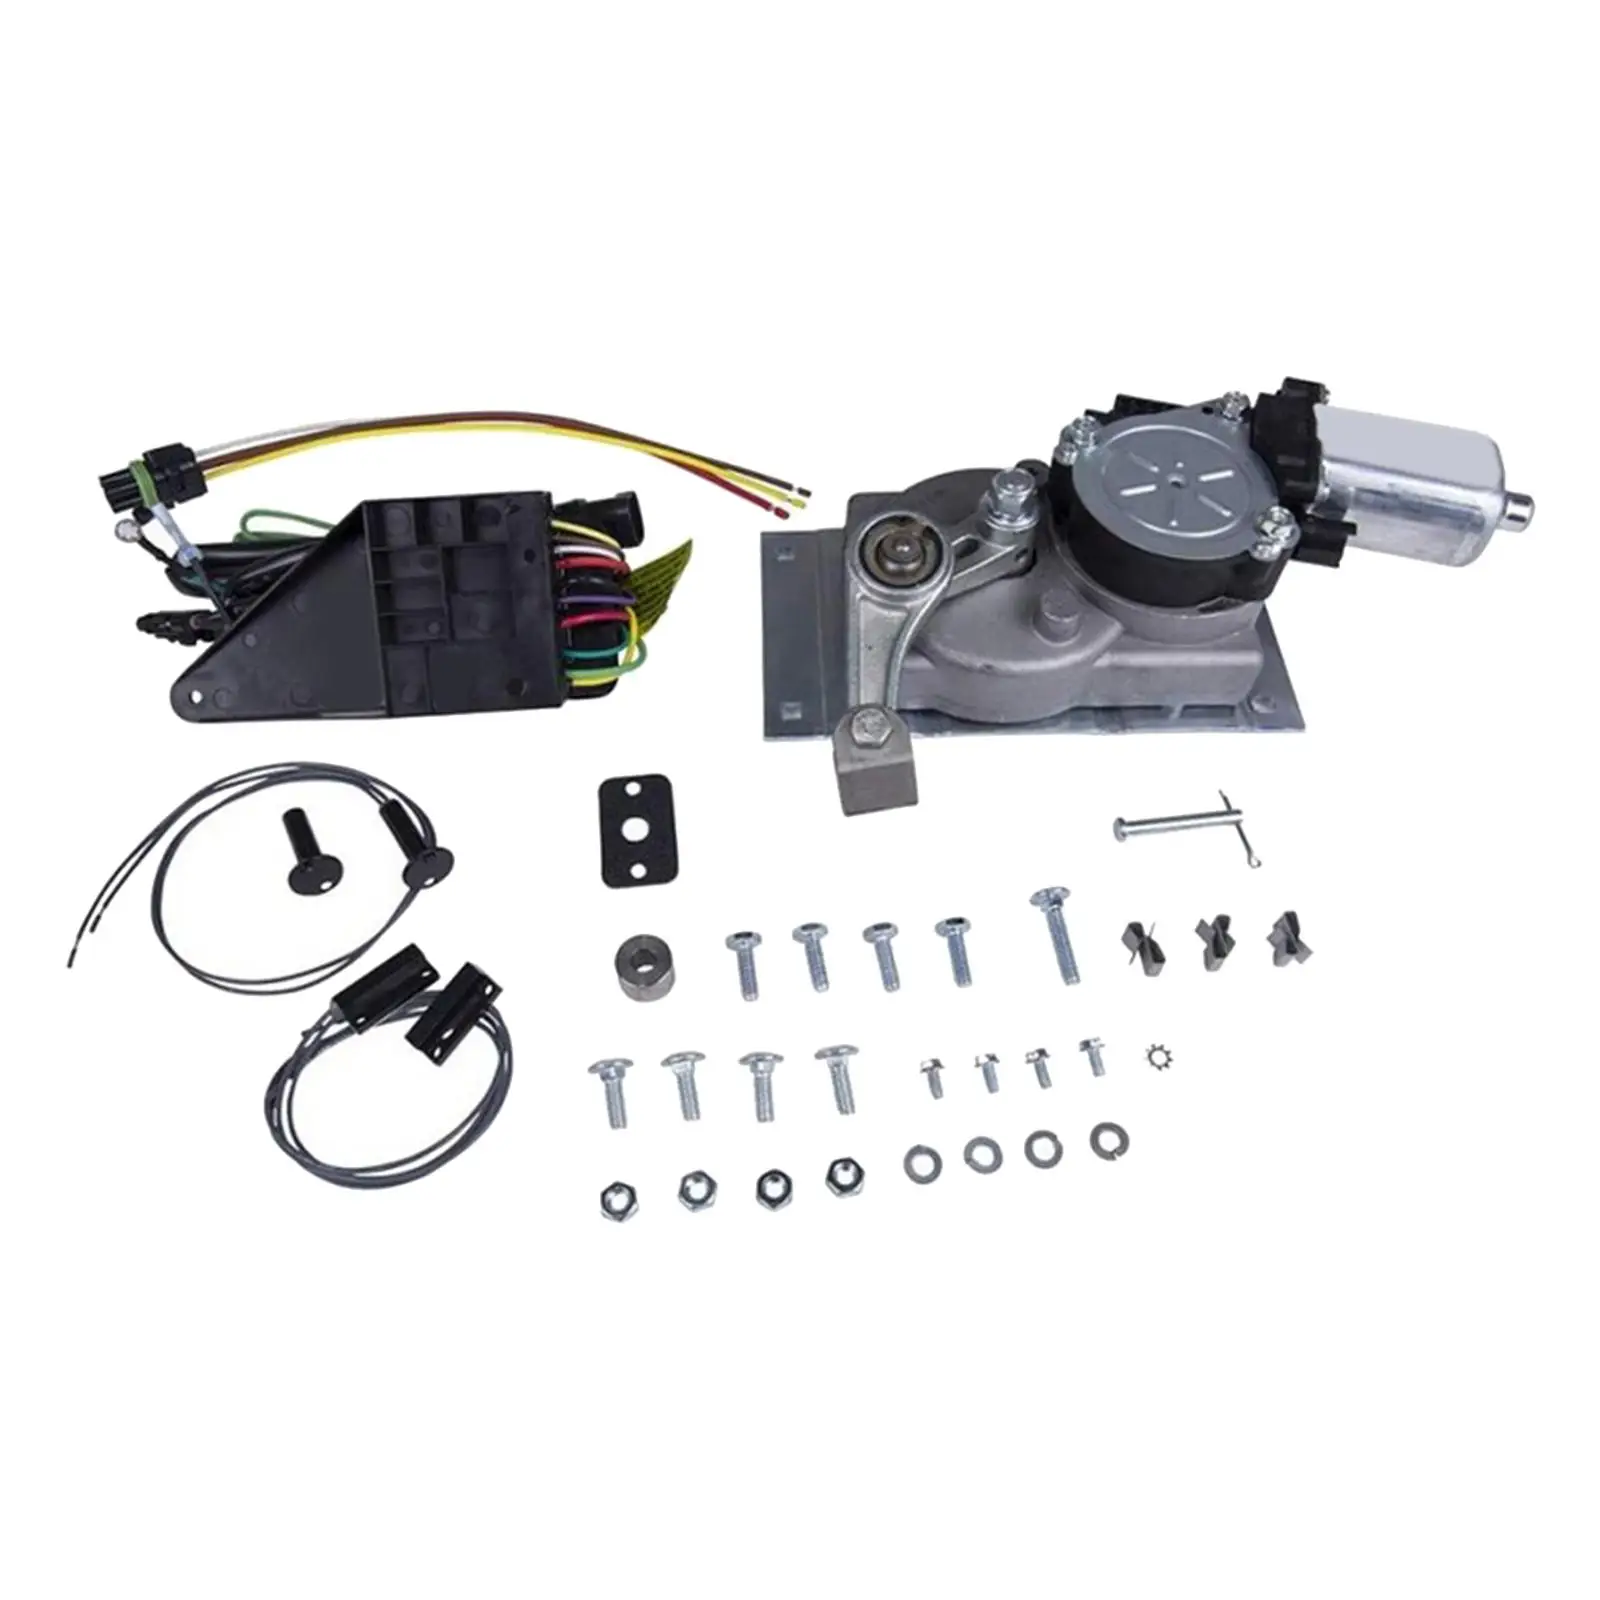 RV Trailer Step Motor Conversion Kit Electric RV Step Motor Gearbox Kit for Transport Vehicle Rvs Convenient Installation